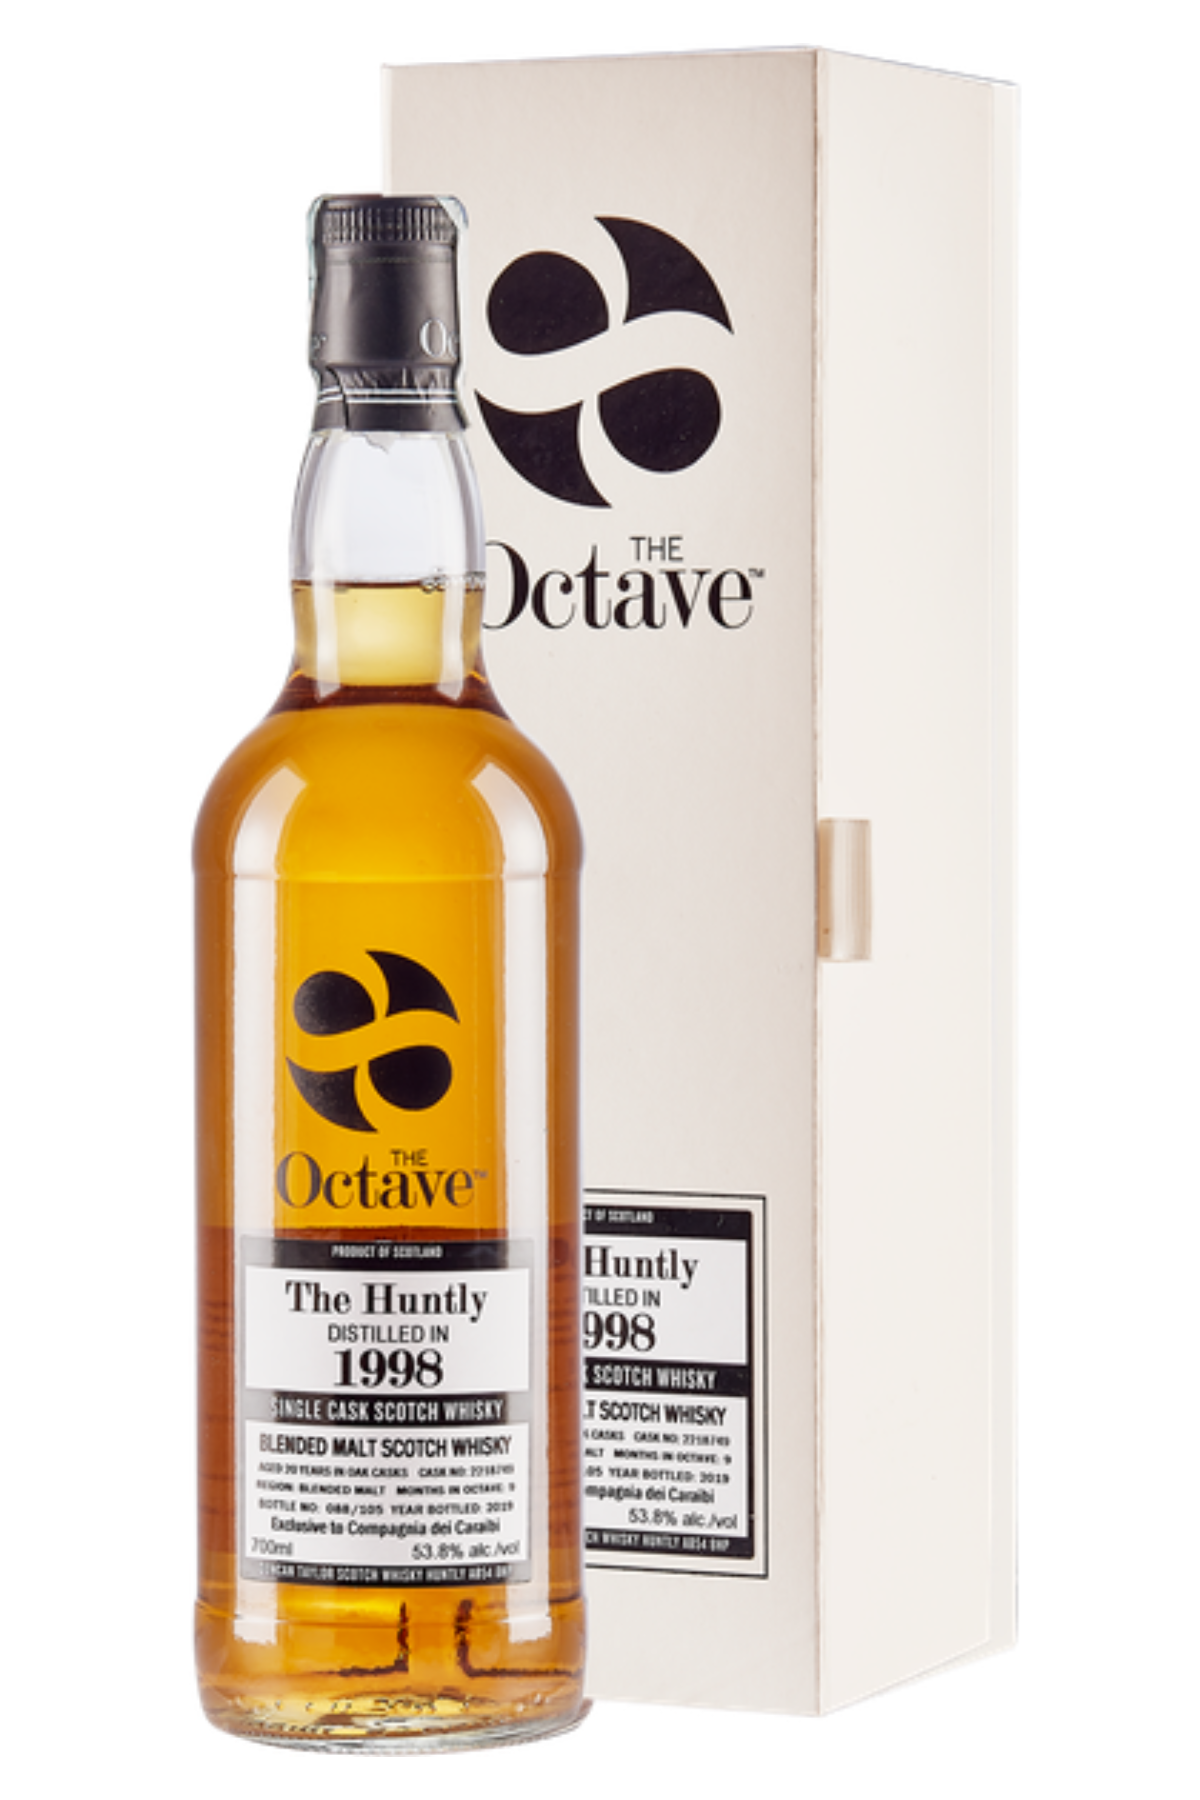 Whisky Duncan Taylor The Octave Huntly Octave 1998 20yo cunned